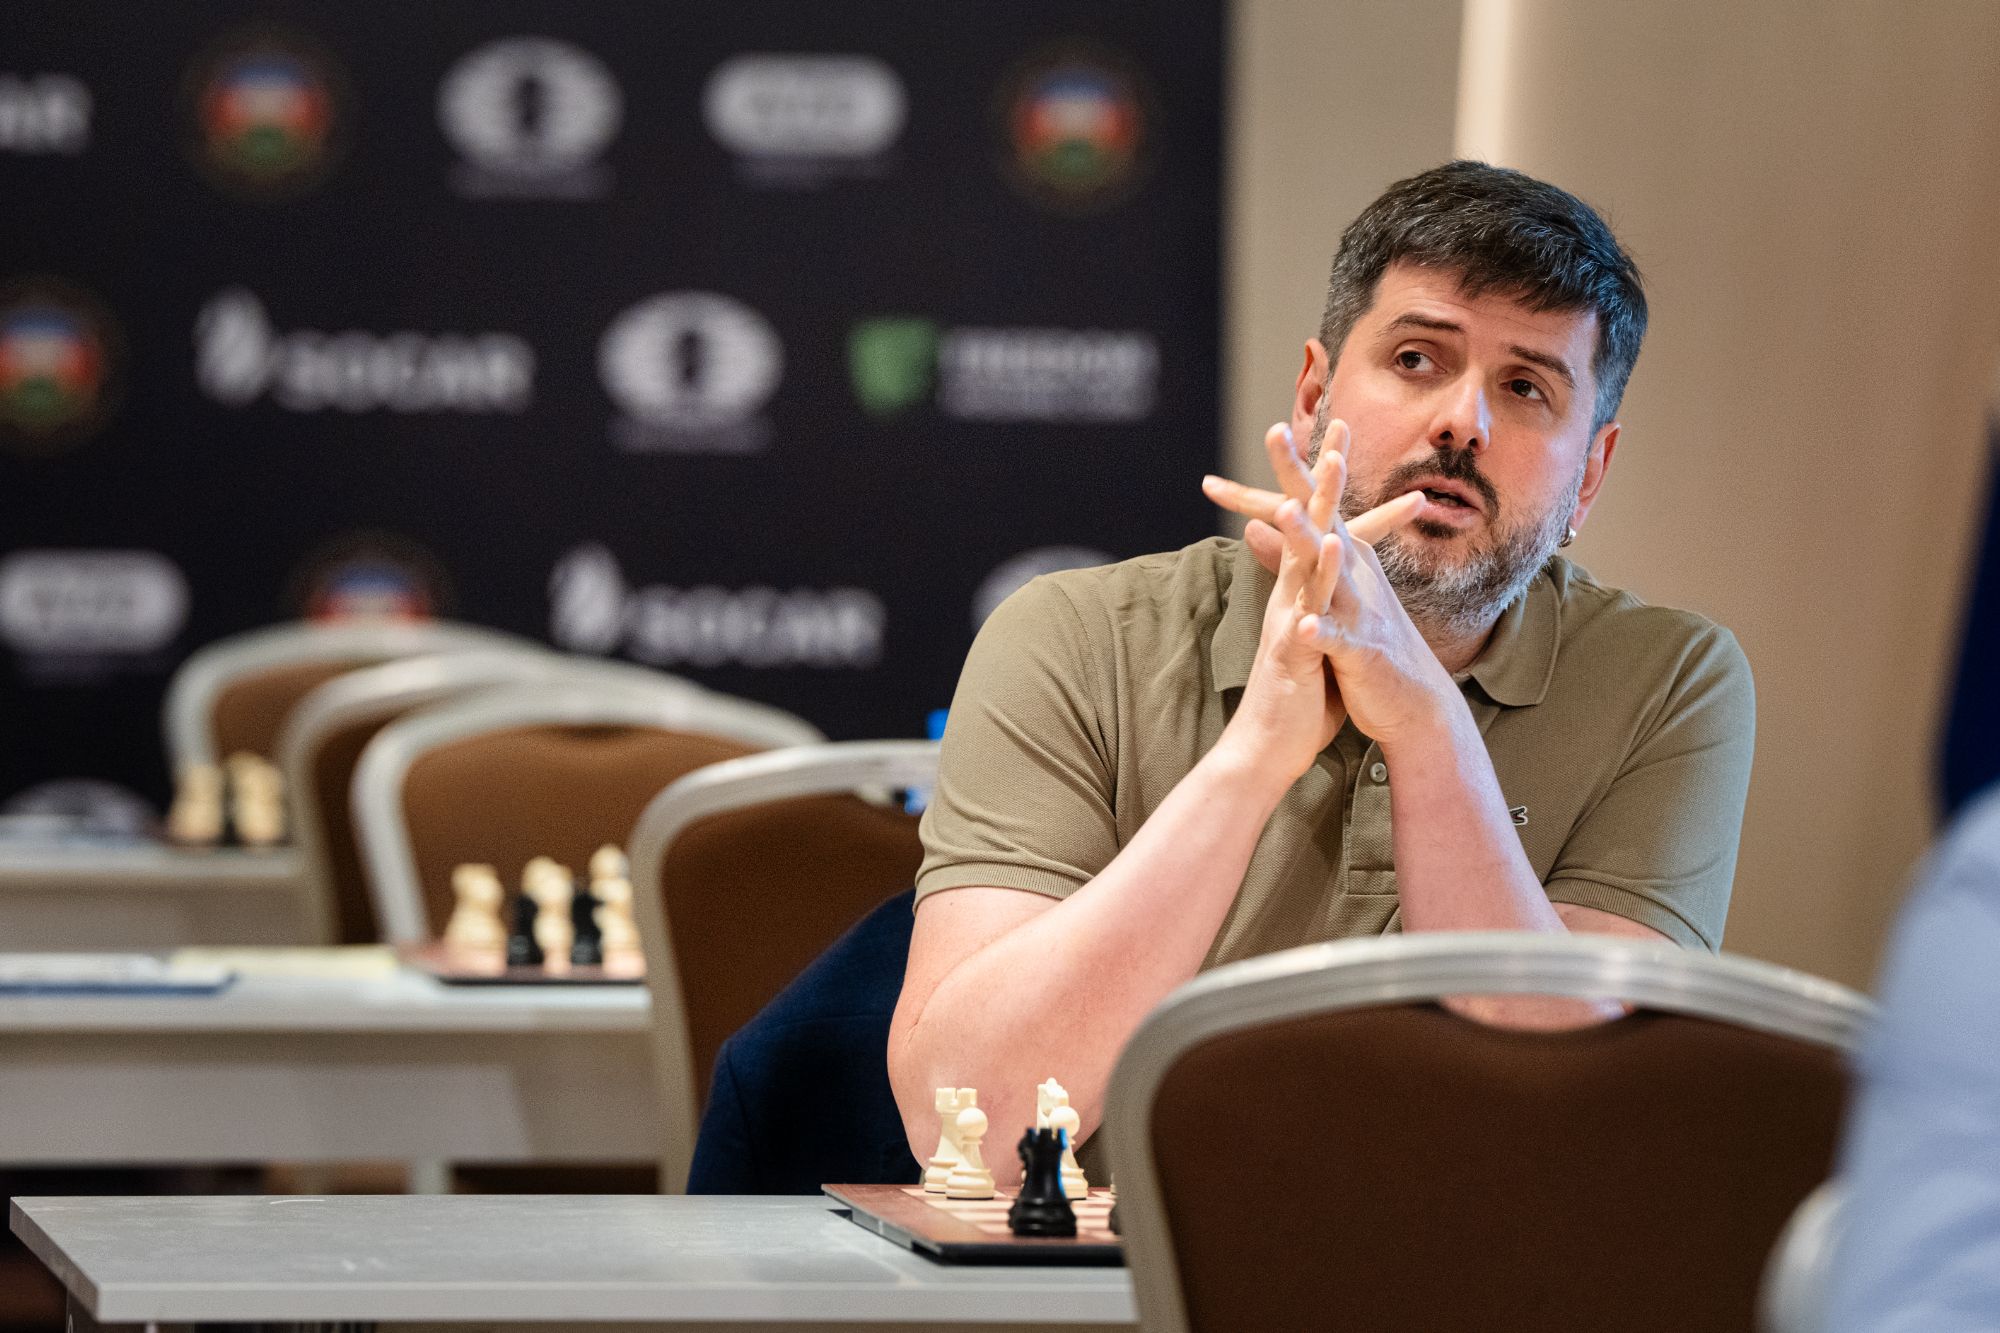 Peter Svidler at the board